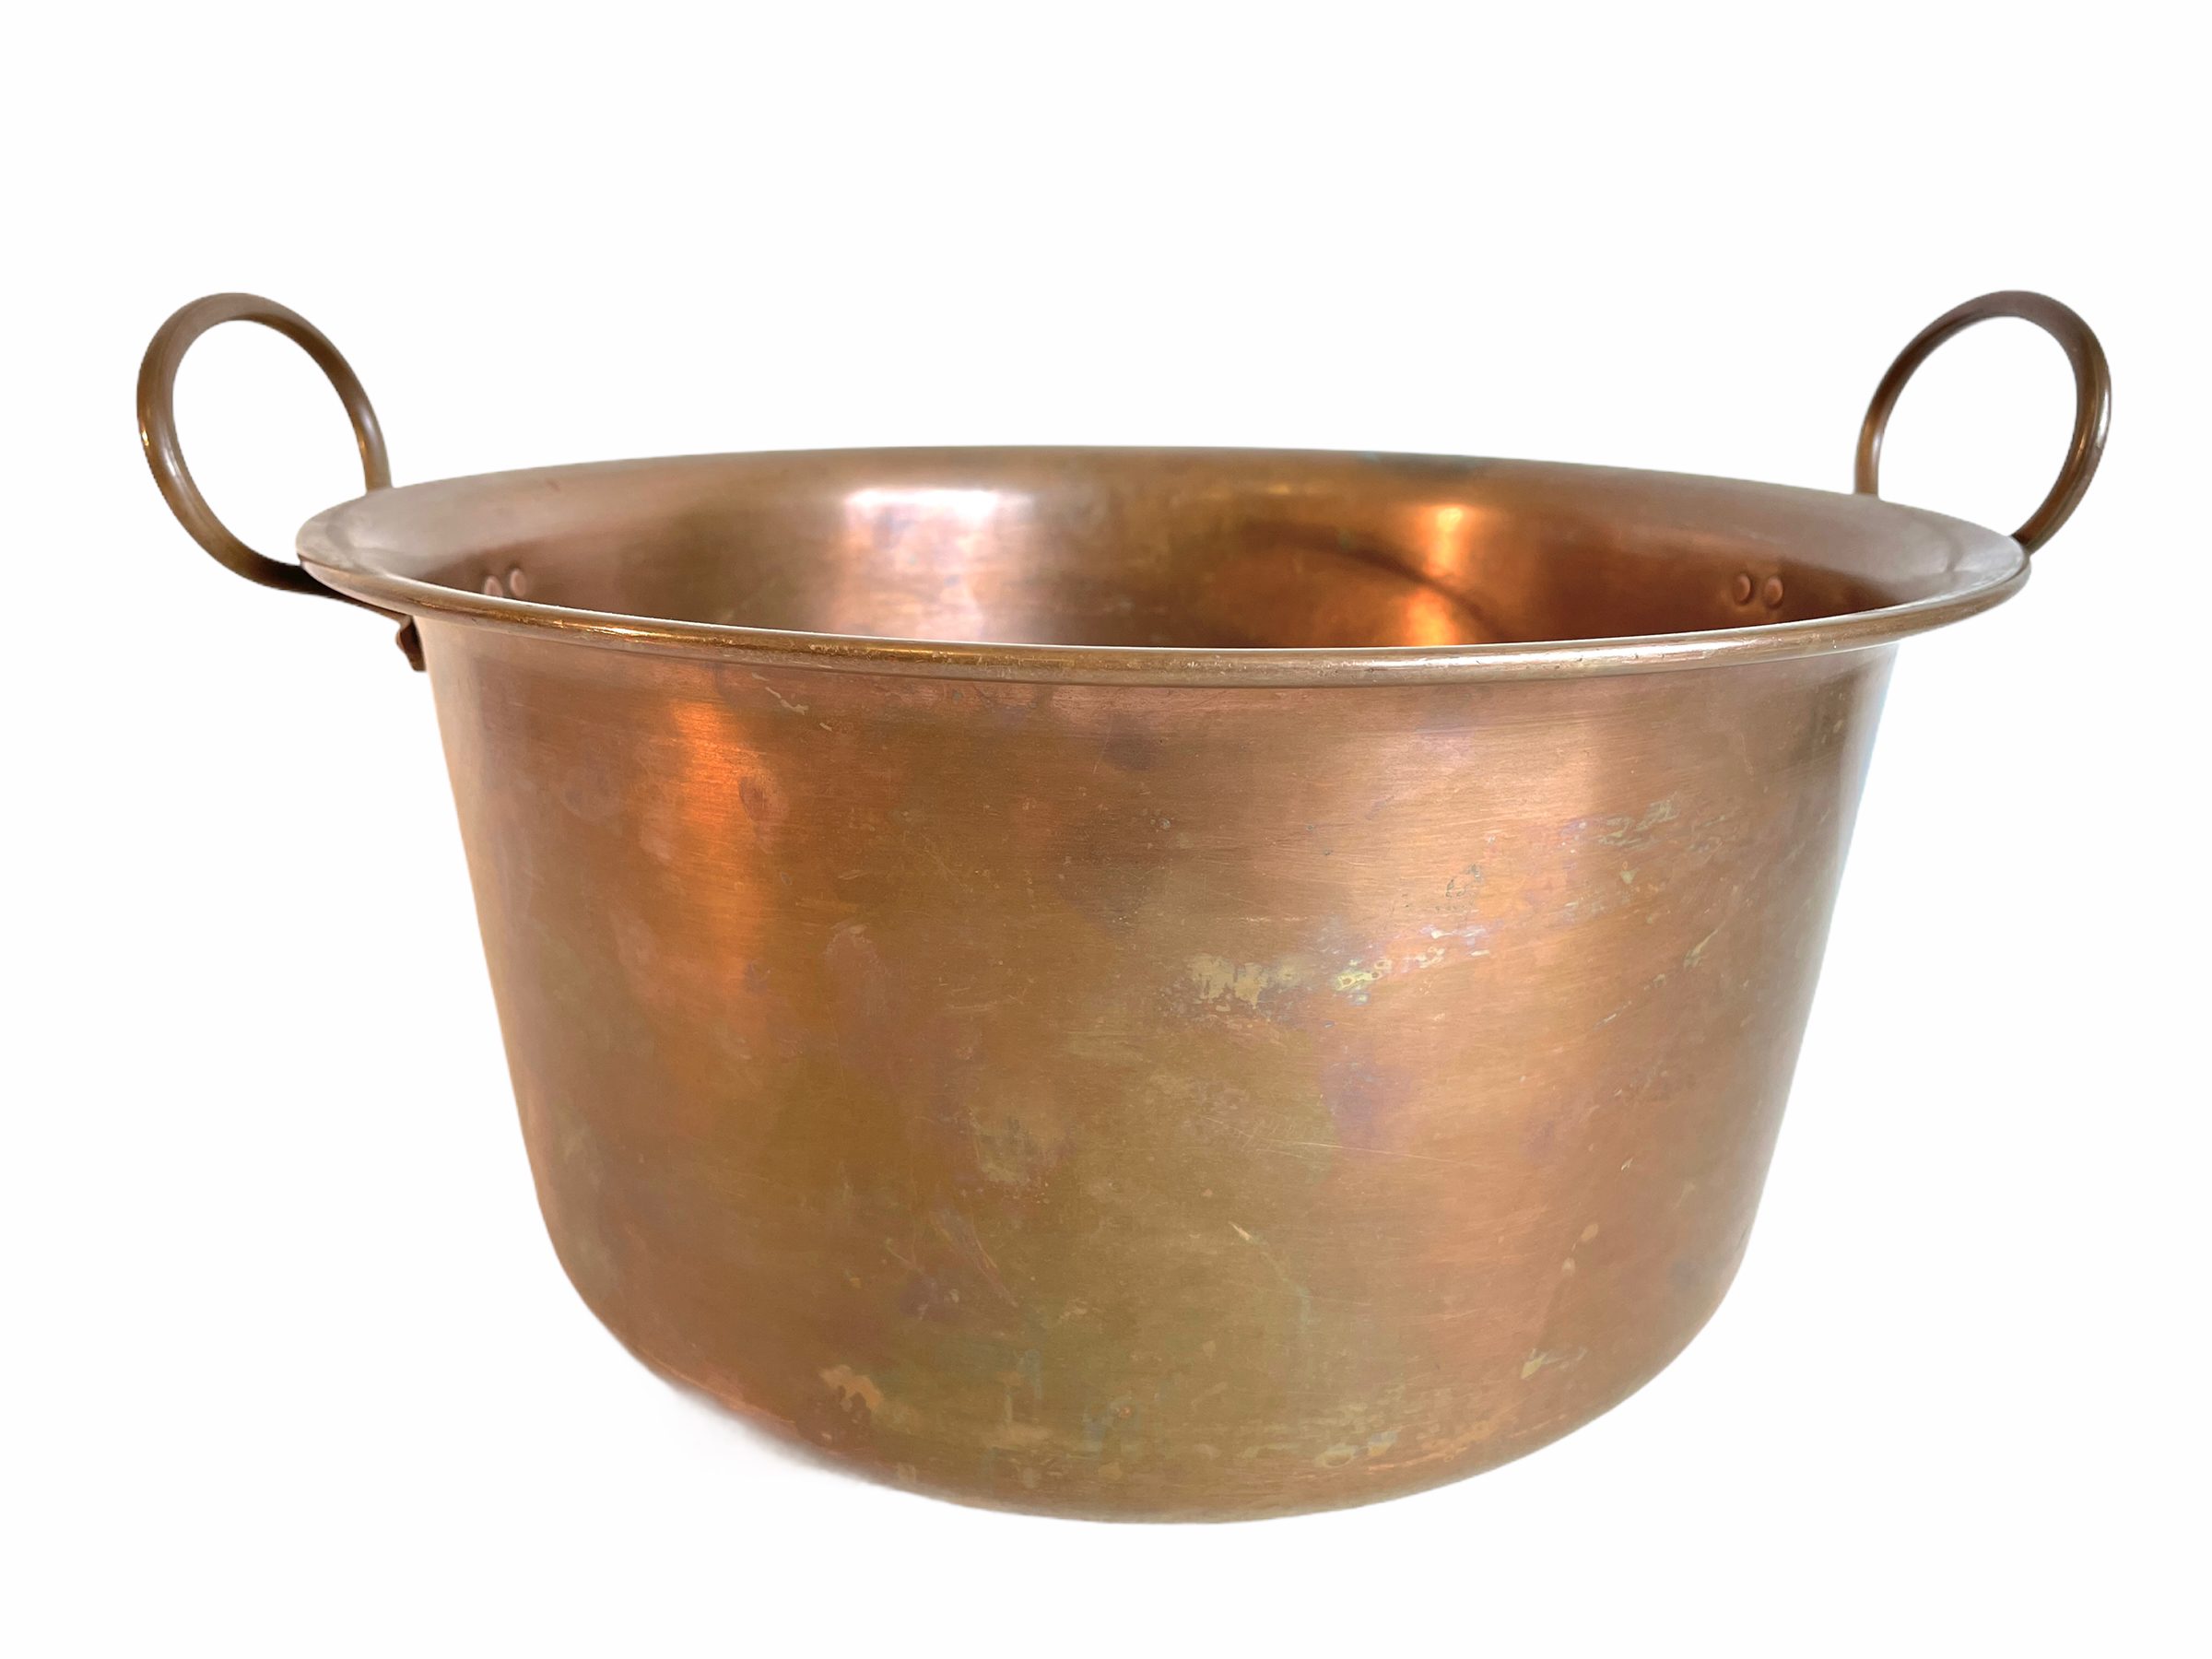 Vintage French Extra Large Hanging Copper Cooking Pot Saucepan